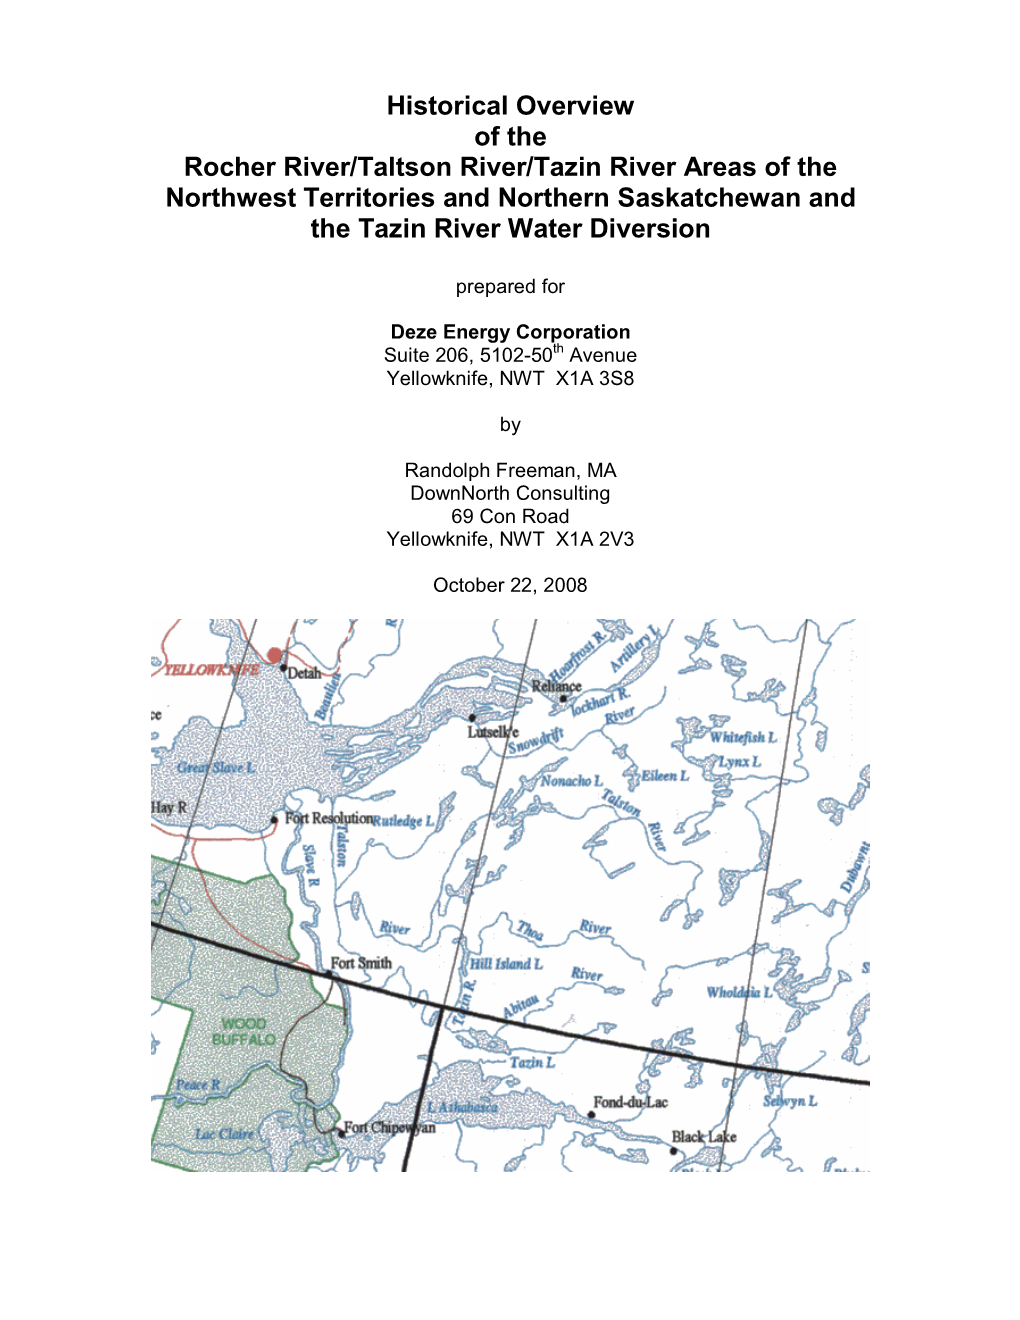 Historical Overview of the Rocher River/Taltson River/Tazin River Areas of the Northwest Territories and Northern Saskatchewan and the Tazin River Water Diversion